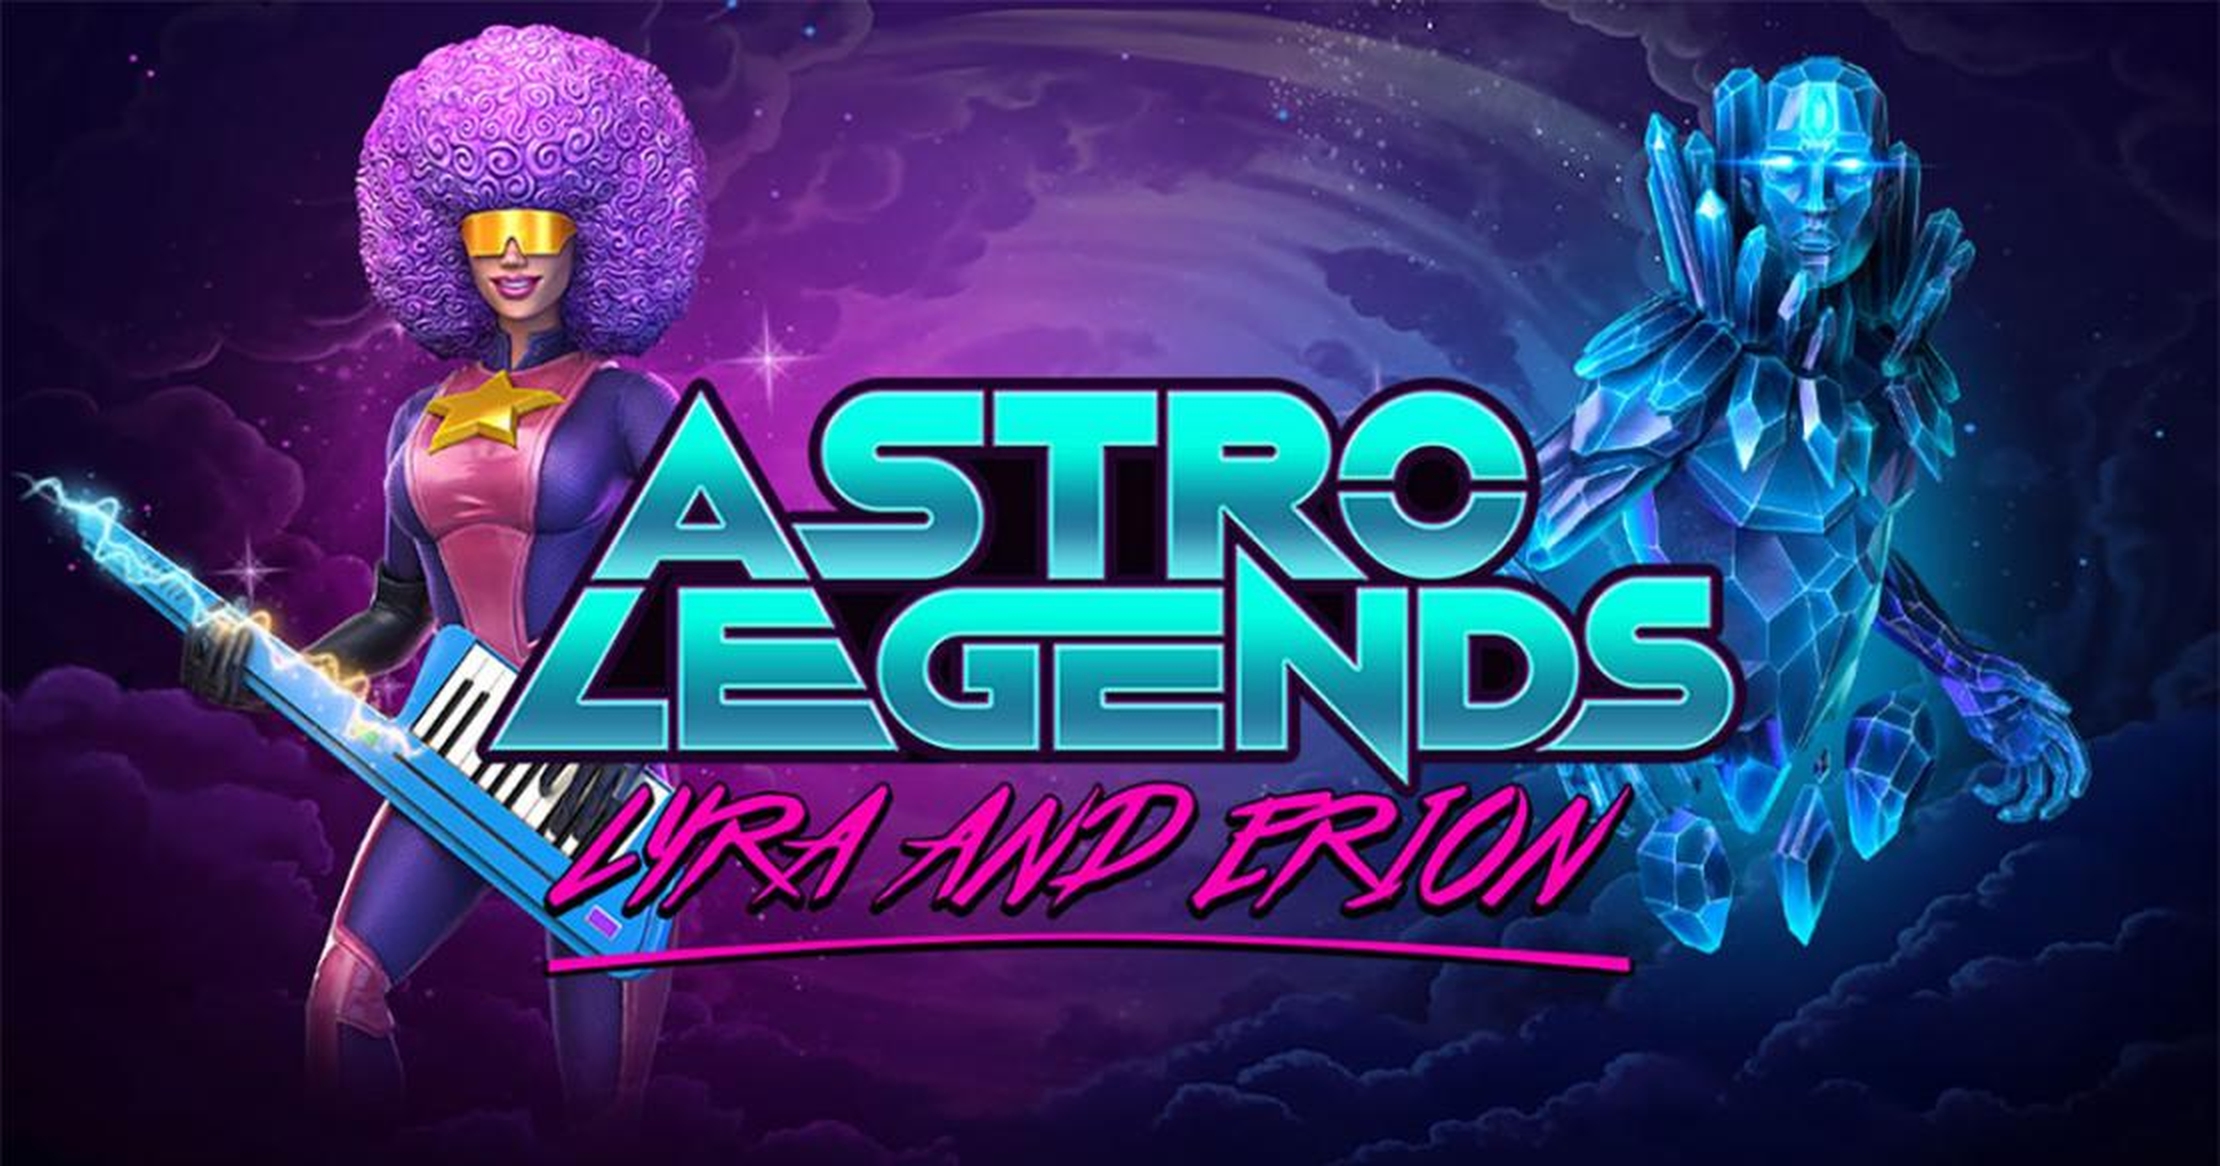 Astro Legends: Lyra and Erion demo